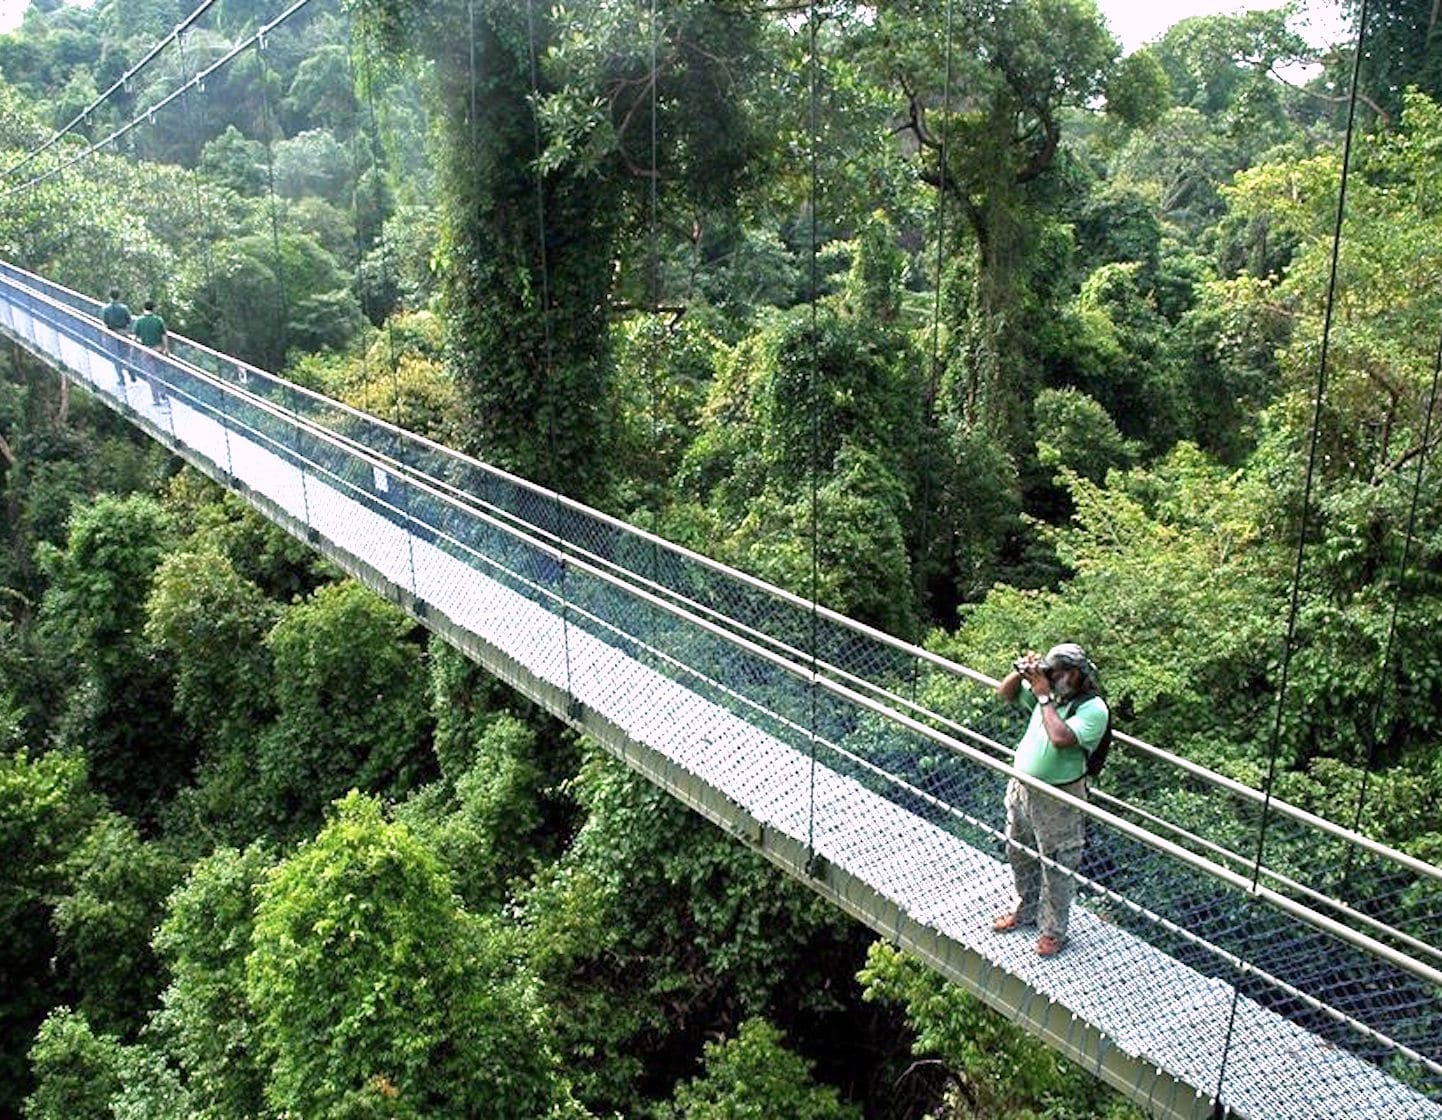 5 Fun Things to Do With the Family at MacRitchie Reservoir Park